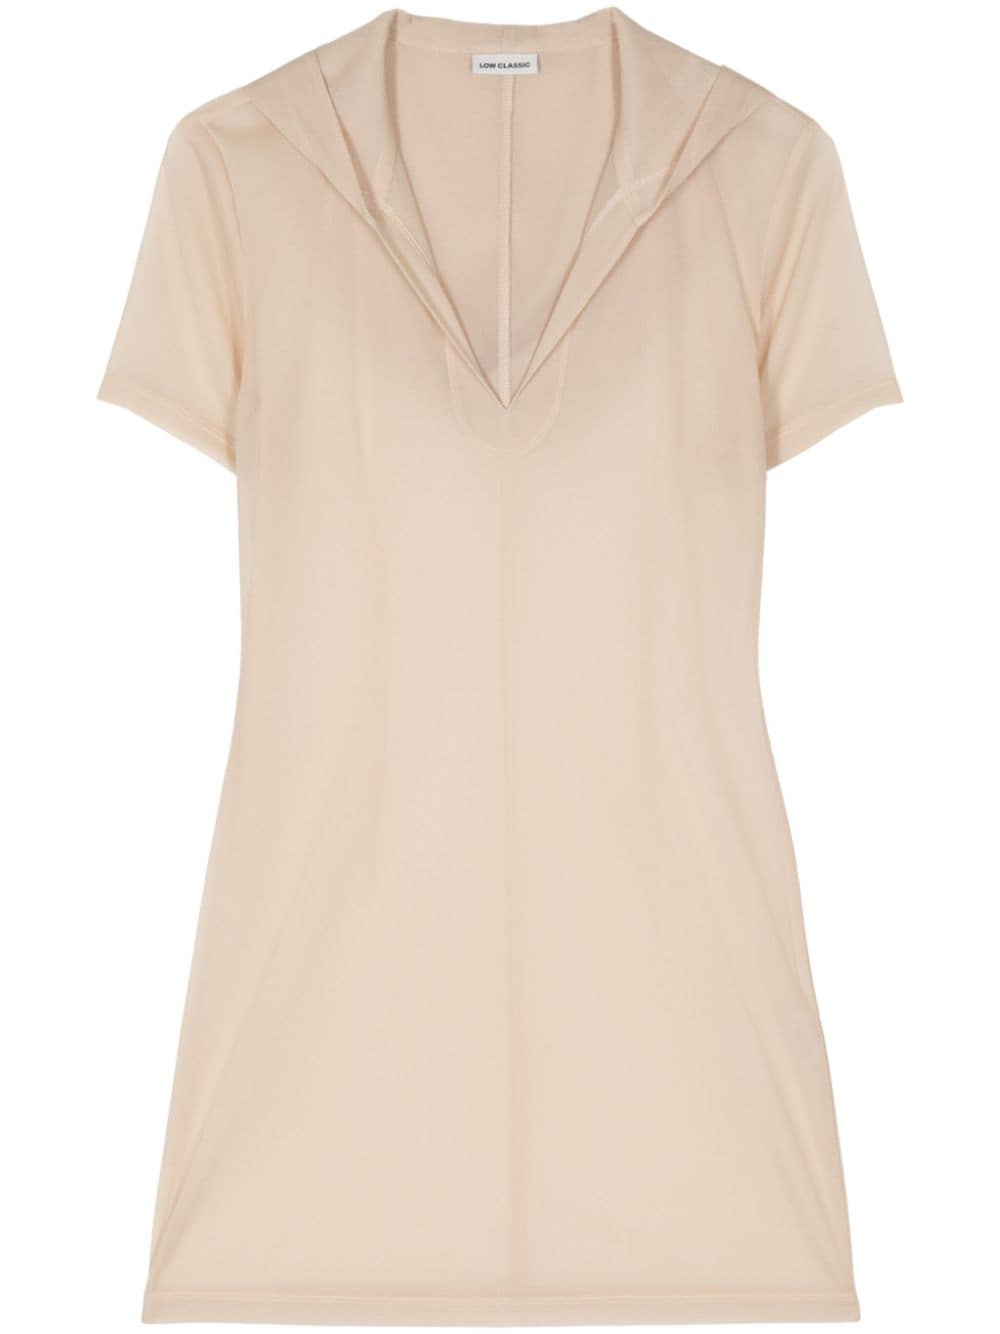 Low Classic Sheer Hooded Top In Neutrals